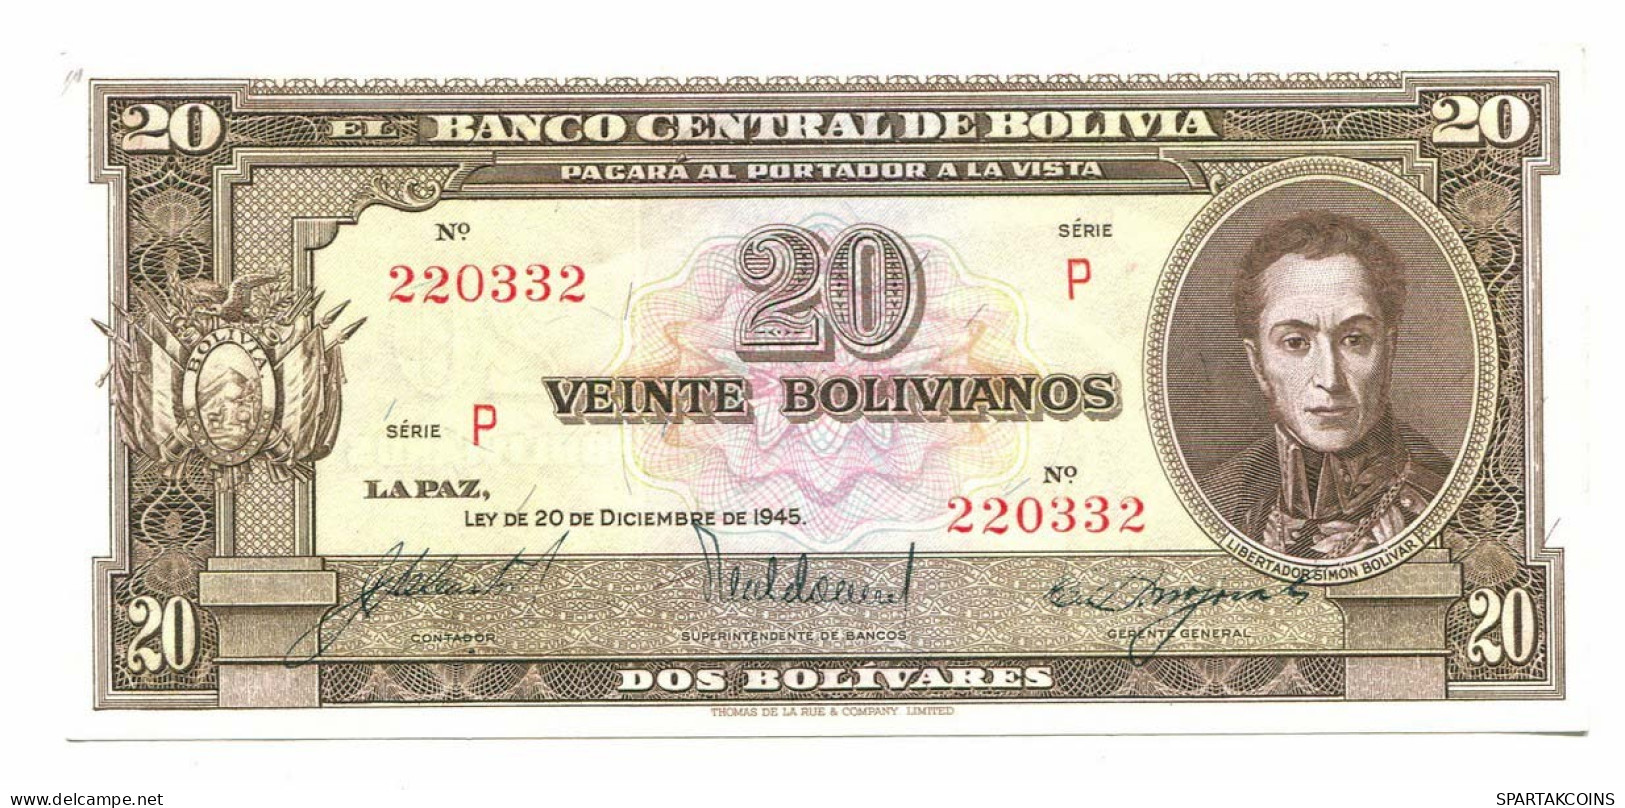 BOLIVIA 20 BOLIVIANOS 1945 SERIE P AUNC Paper Money Banknote #P10798.4 - [11] Local Banknote Issues